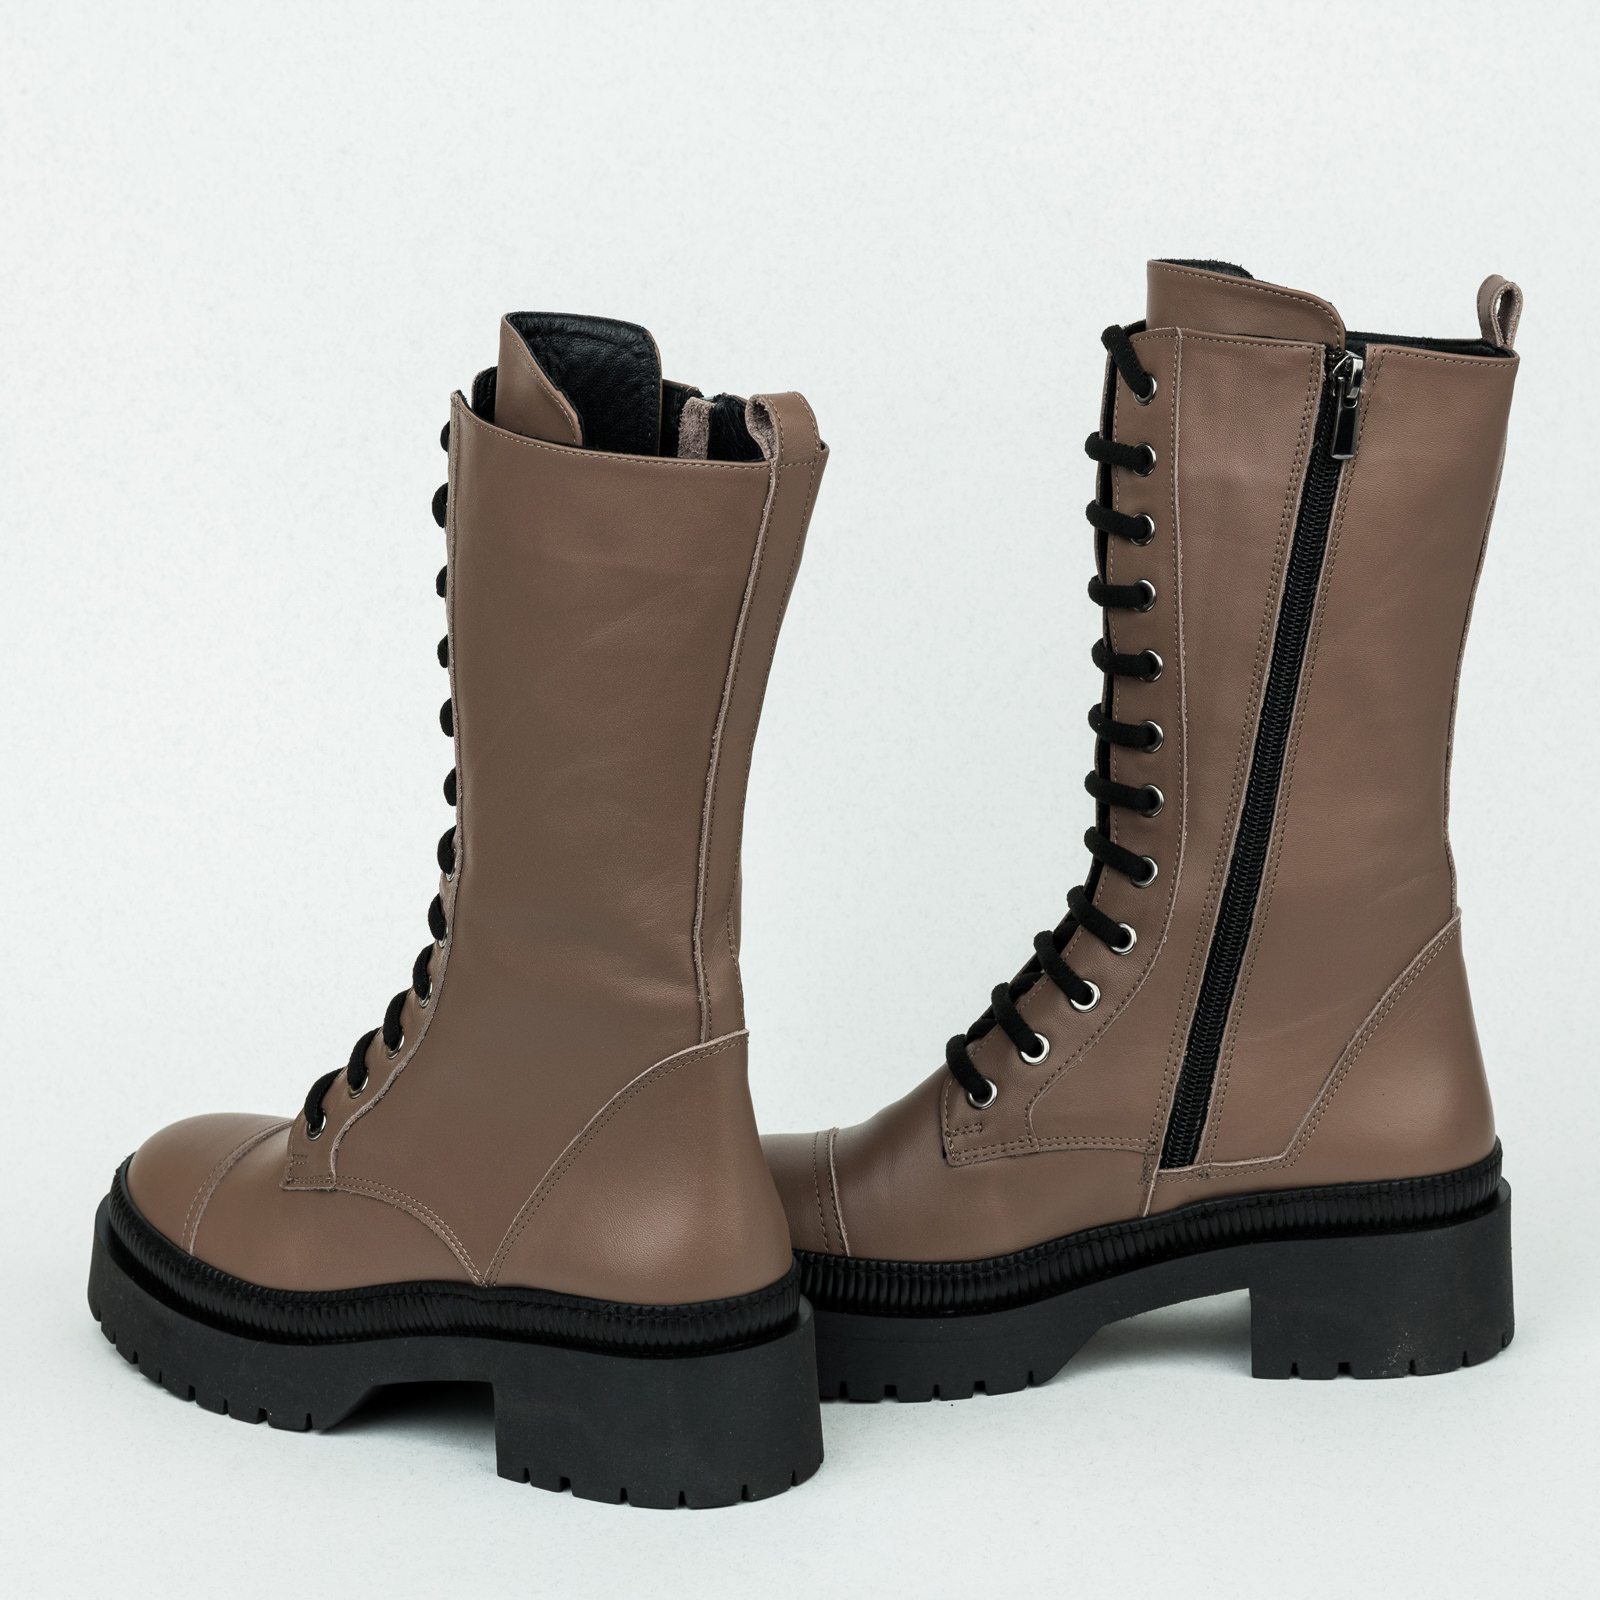 Leather ankle boots B150 - BROWN